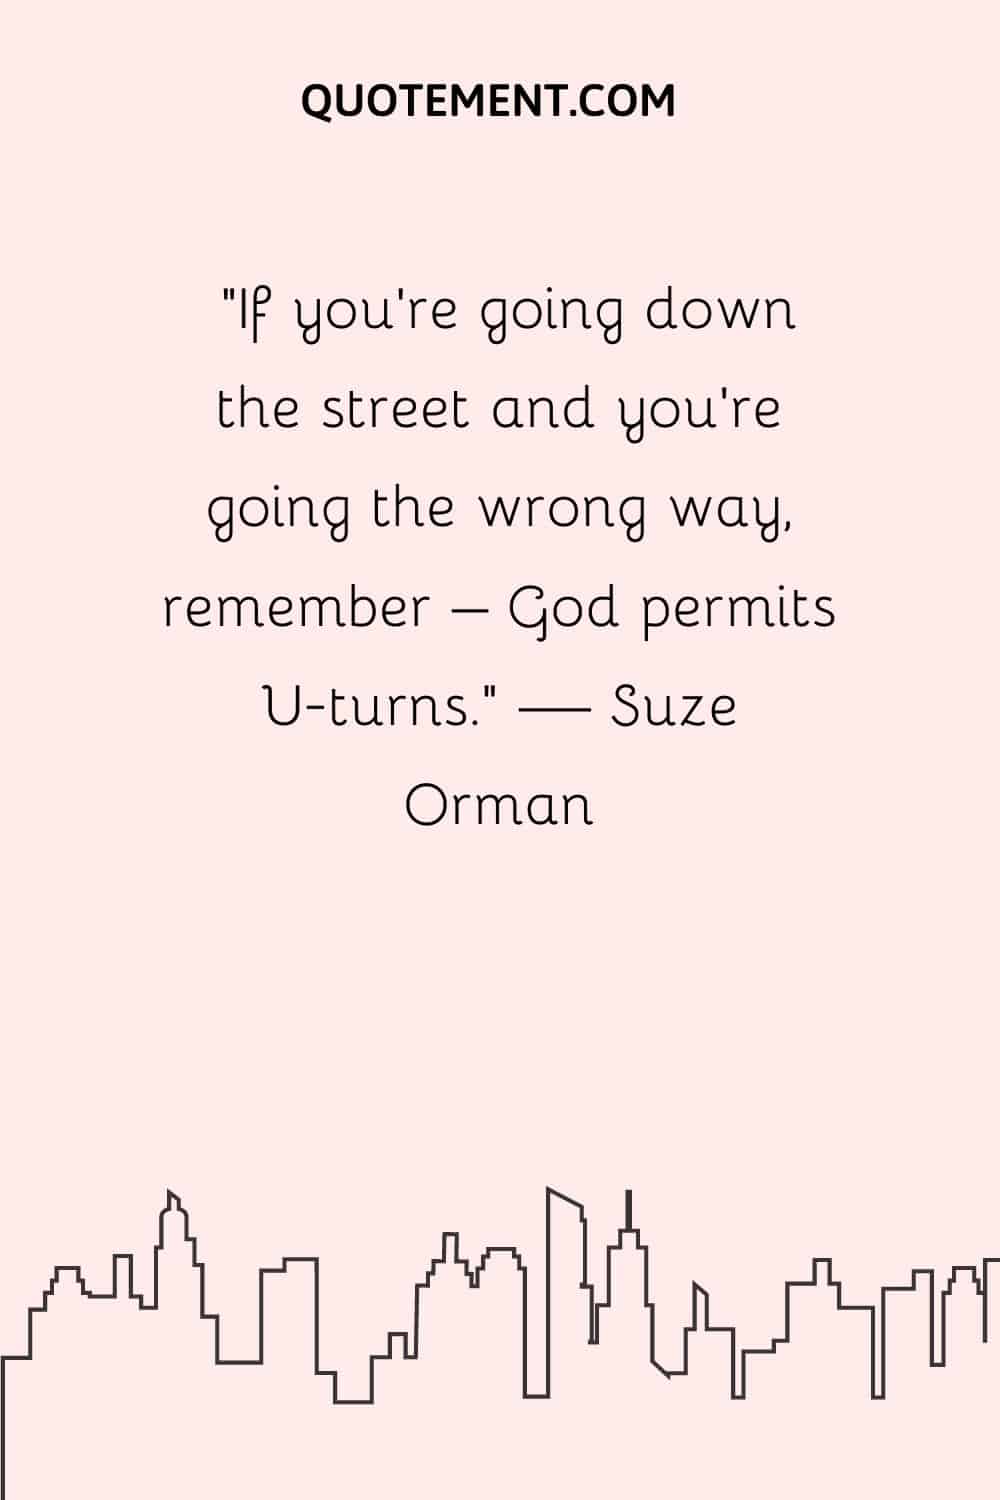 If you’re going down the street and you’re going the wrong way, remember – God permits U-turns